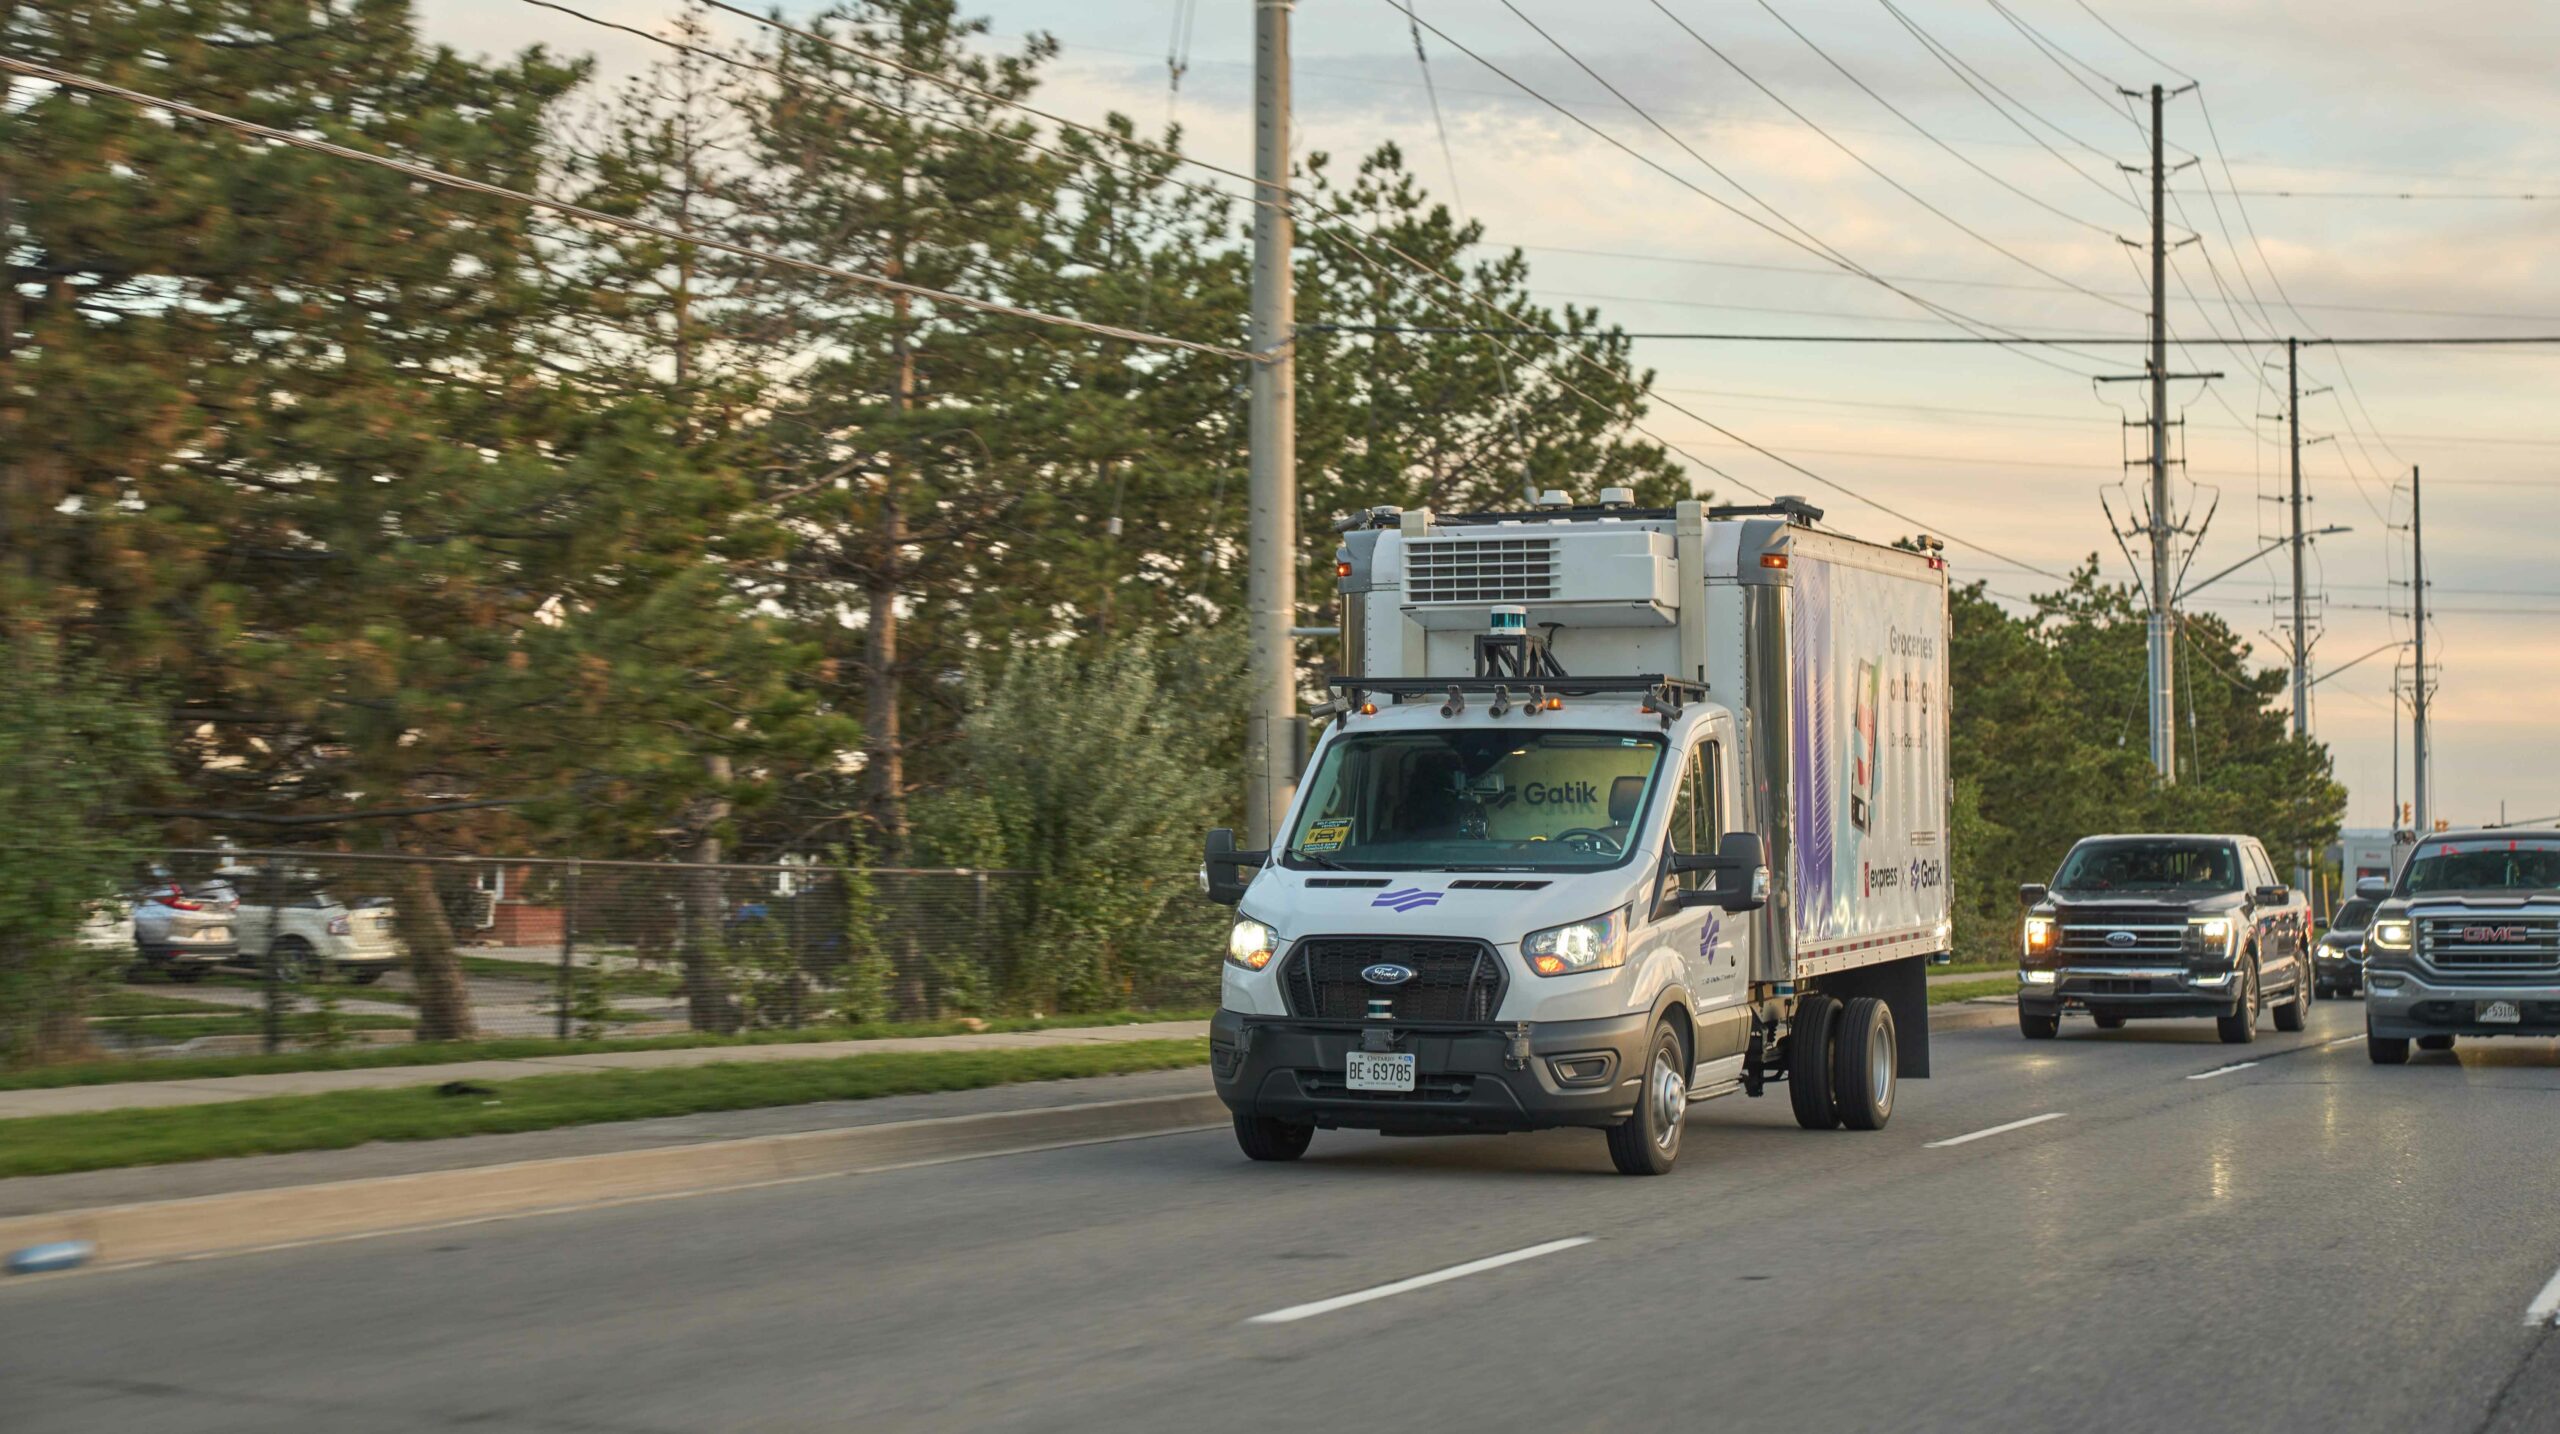 Loblaws starts transporting goods from its distribution facility in driverless trucks